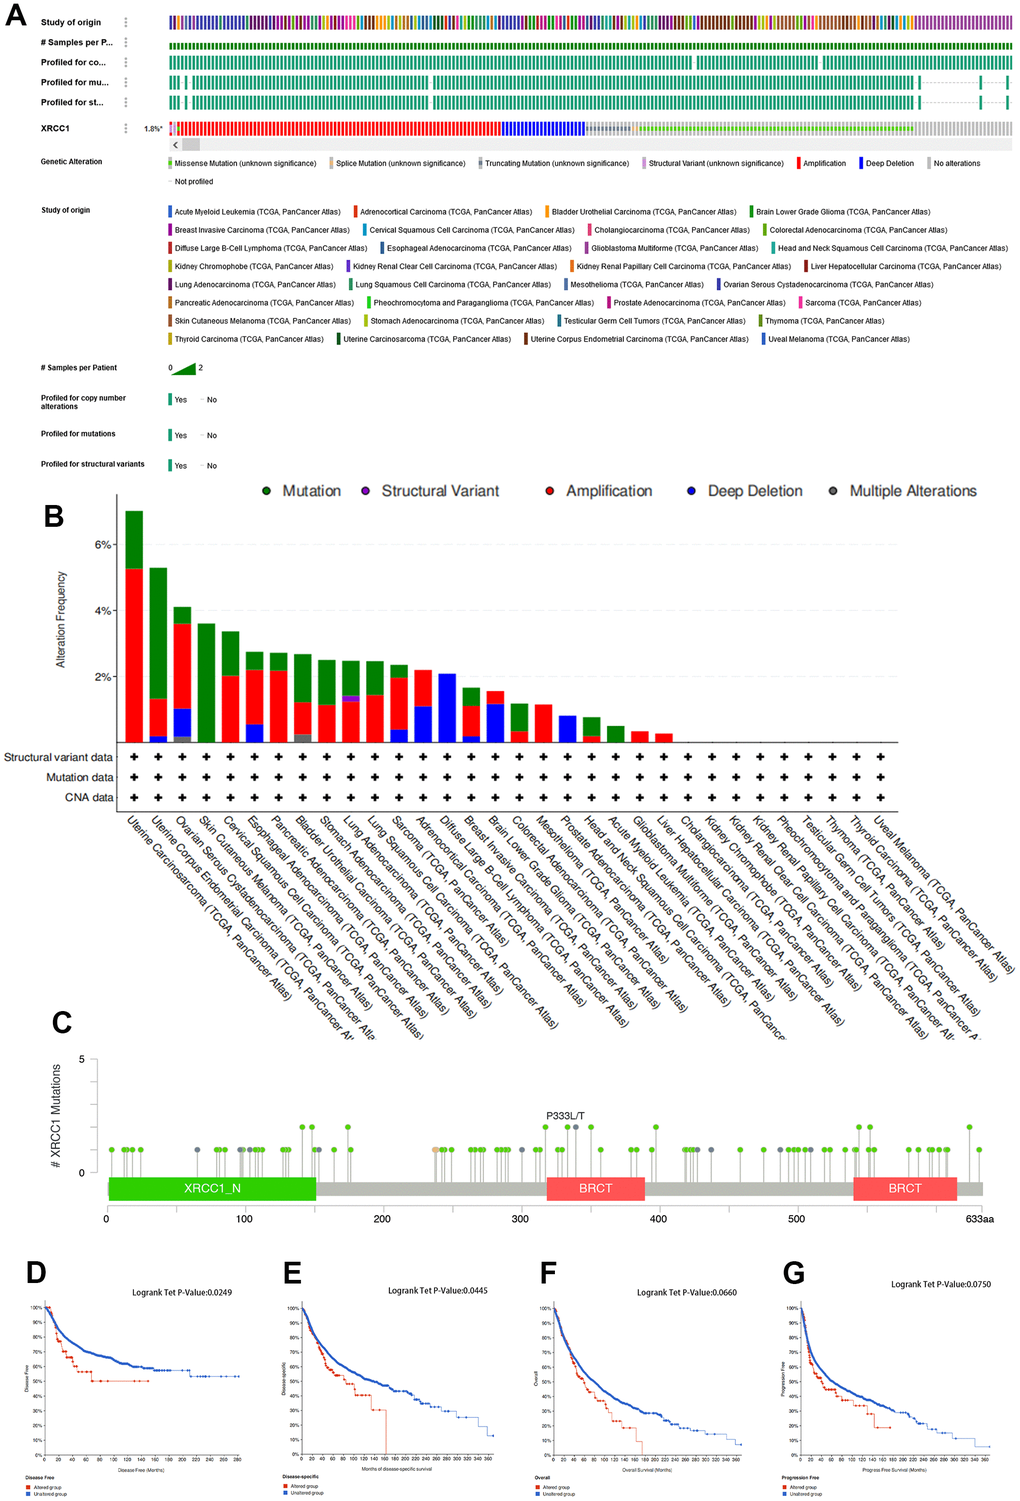 Mutation feature of XRCC1 in pan-cancer of TCGA. (A) The cBioPortal database was used to analyze the proportion of patients with XRCC1 genomic alterations in pan-cancer. The frequency of mutation type (B) and mutation site (C) of XRCC1 in TCGA tumors was analyzed using the cBioPortal tool. The cBioPortal database was used to explore the impact of XRCC1 mutation status on OS (D), DFS (E), PFS (F), and DSS (G) of cancer patients.